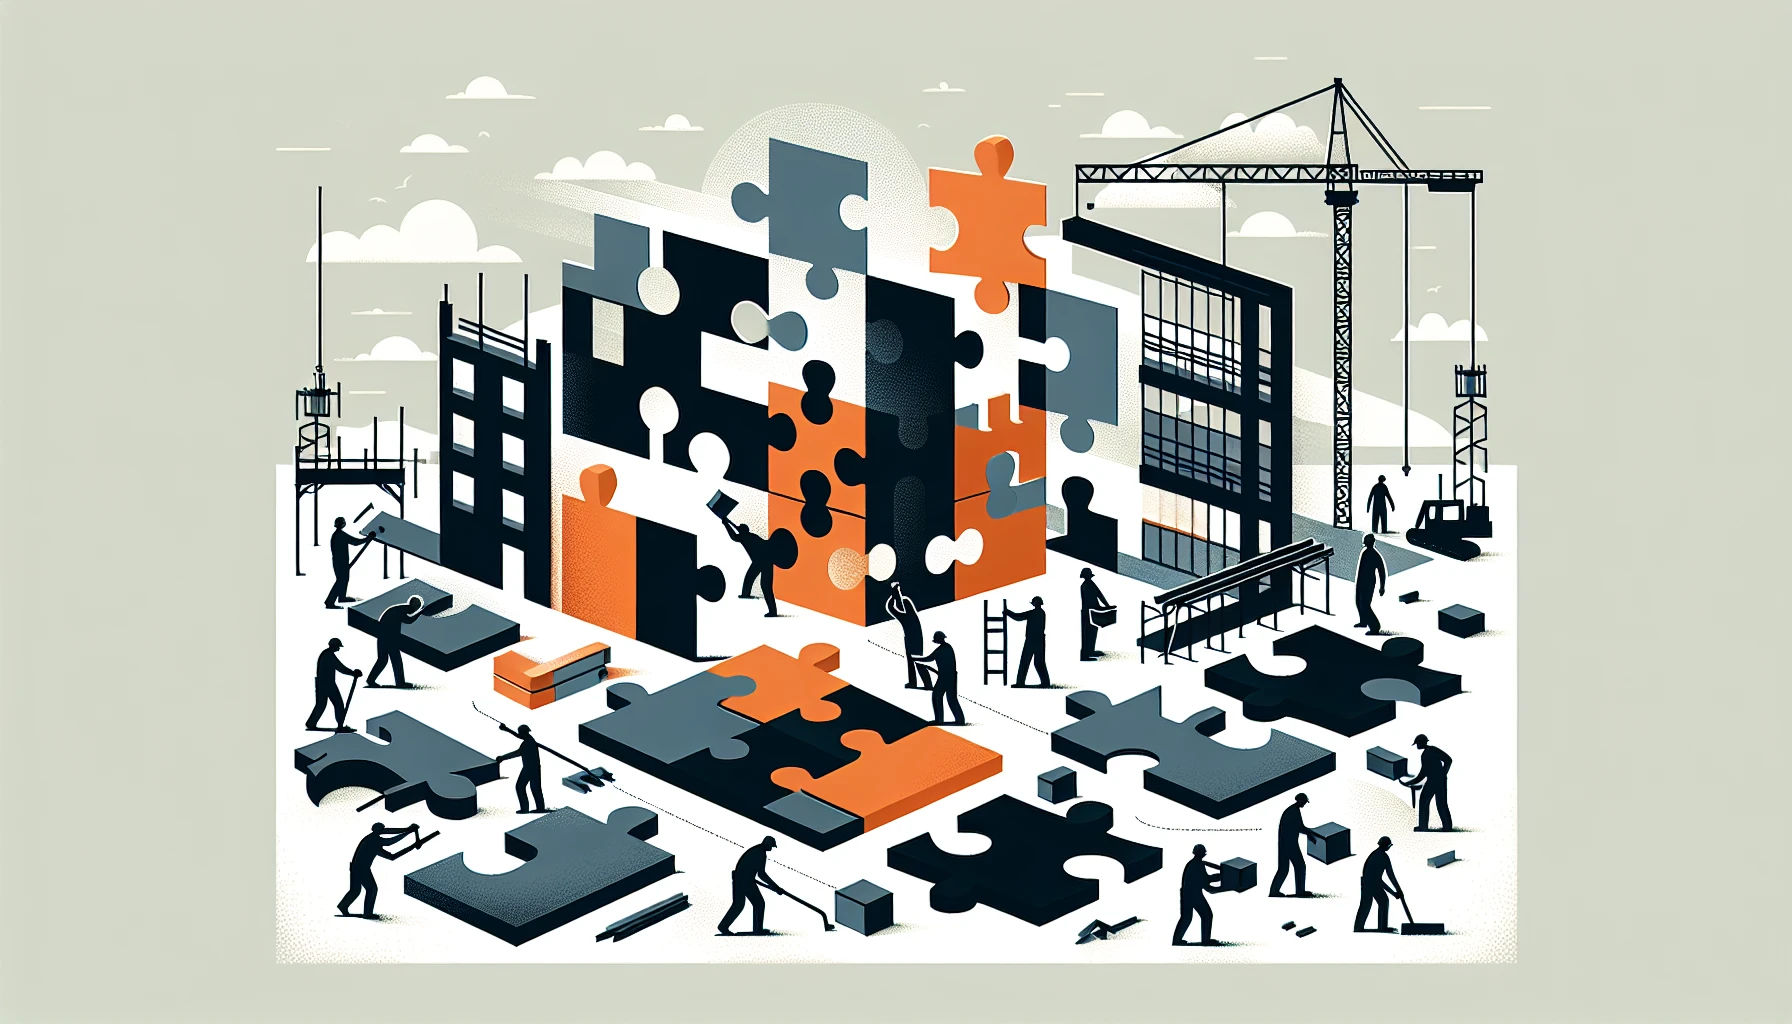 Commercial management in construction site illustration with workers and puzzle pieces